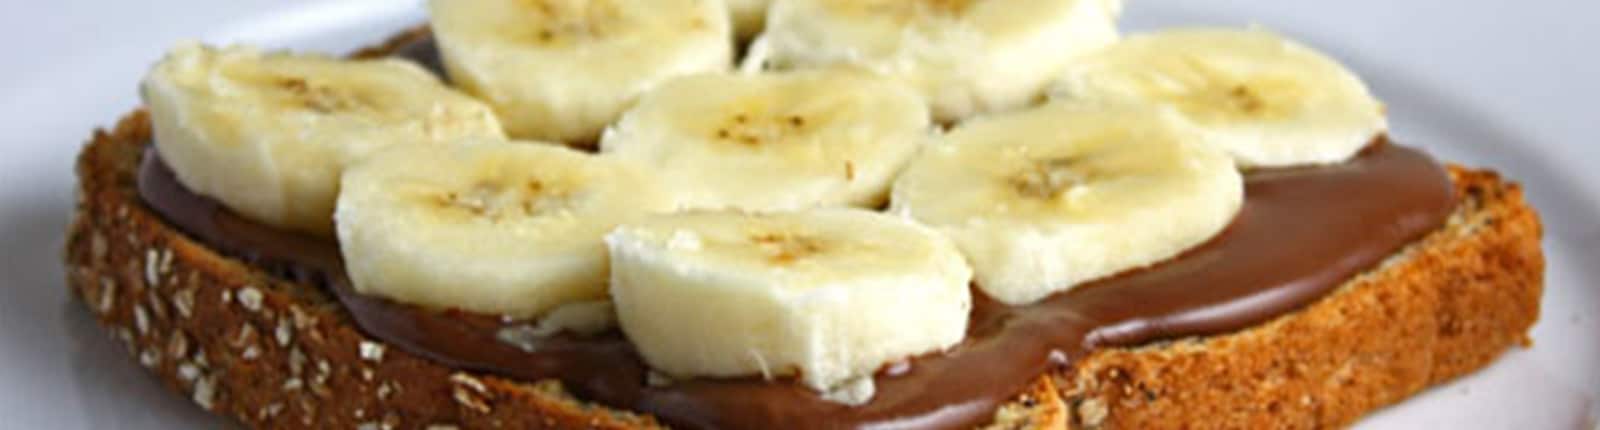 Banana Open Faced Sandwich with Nutella<sup>®</sup>